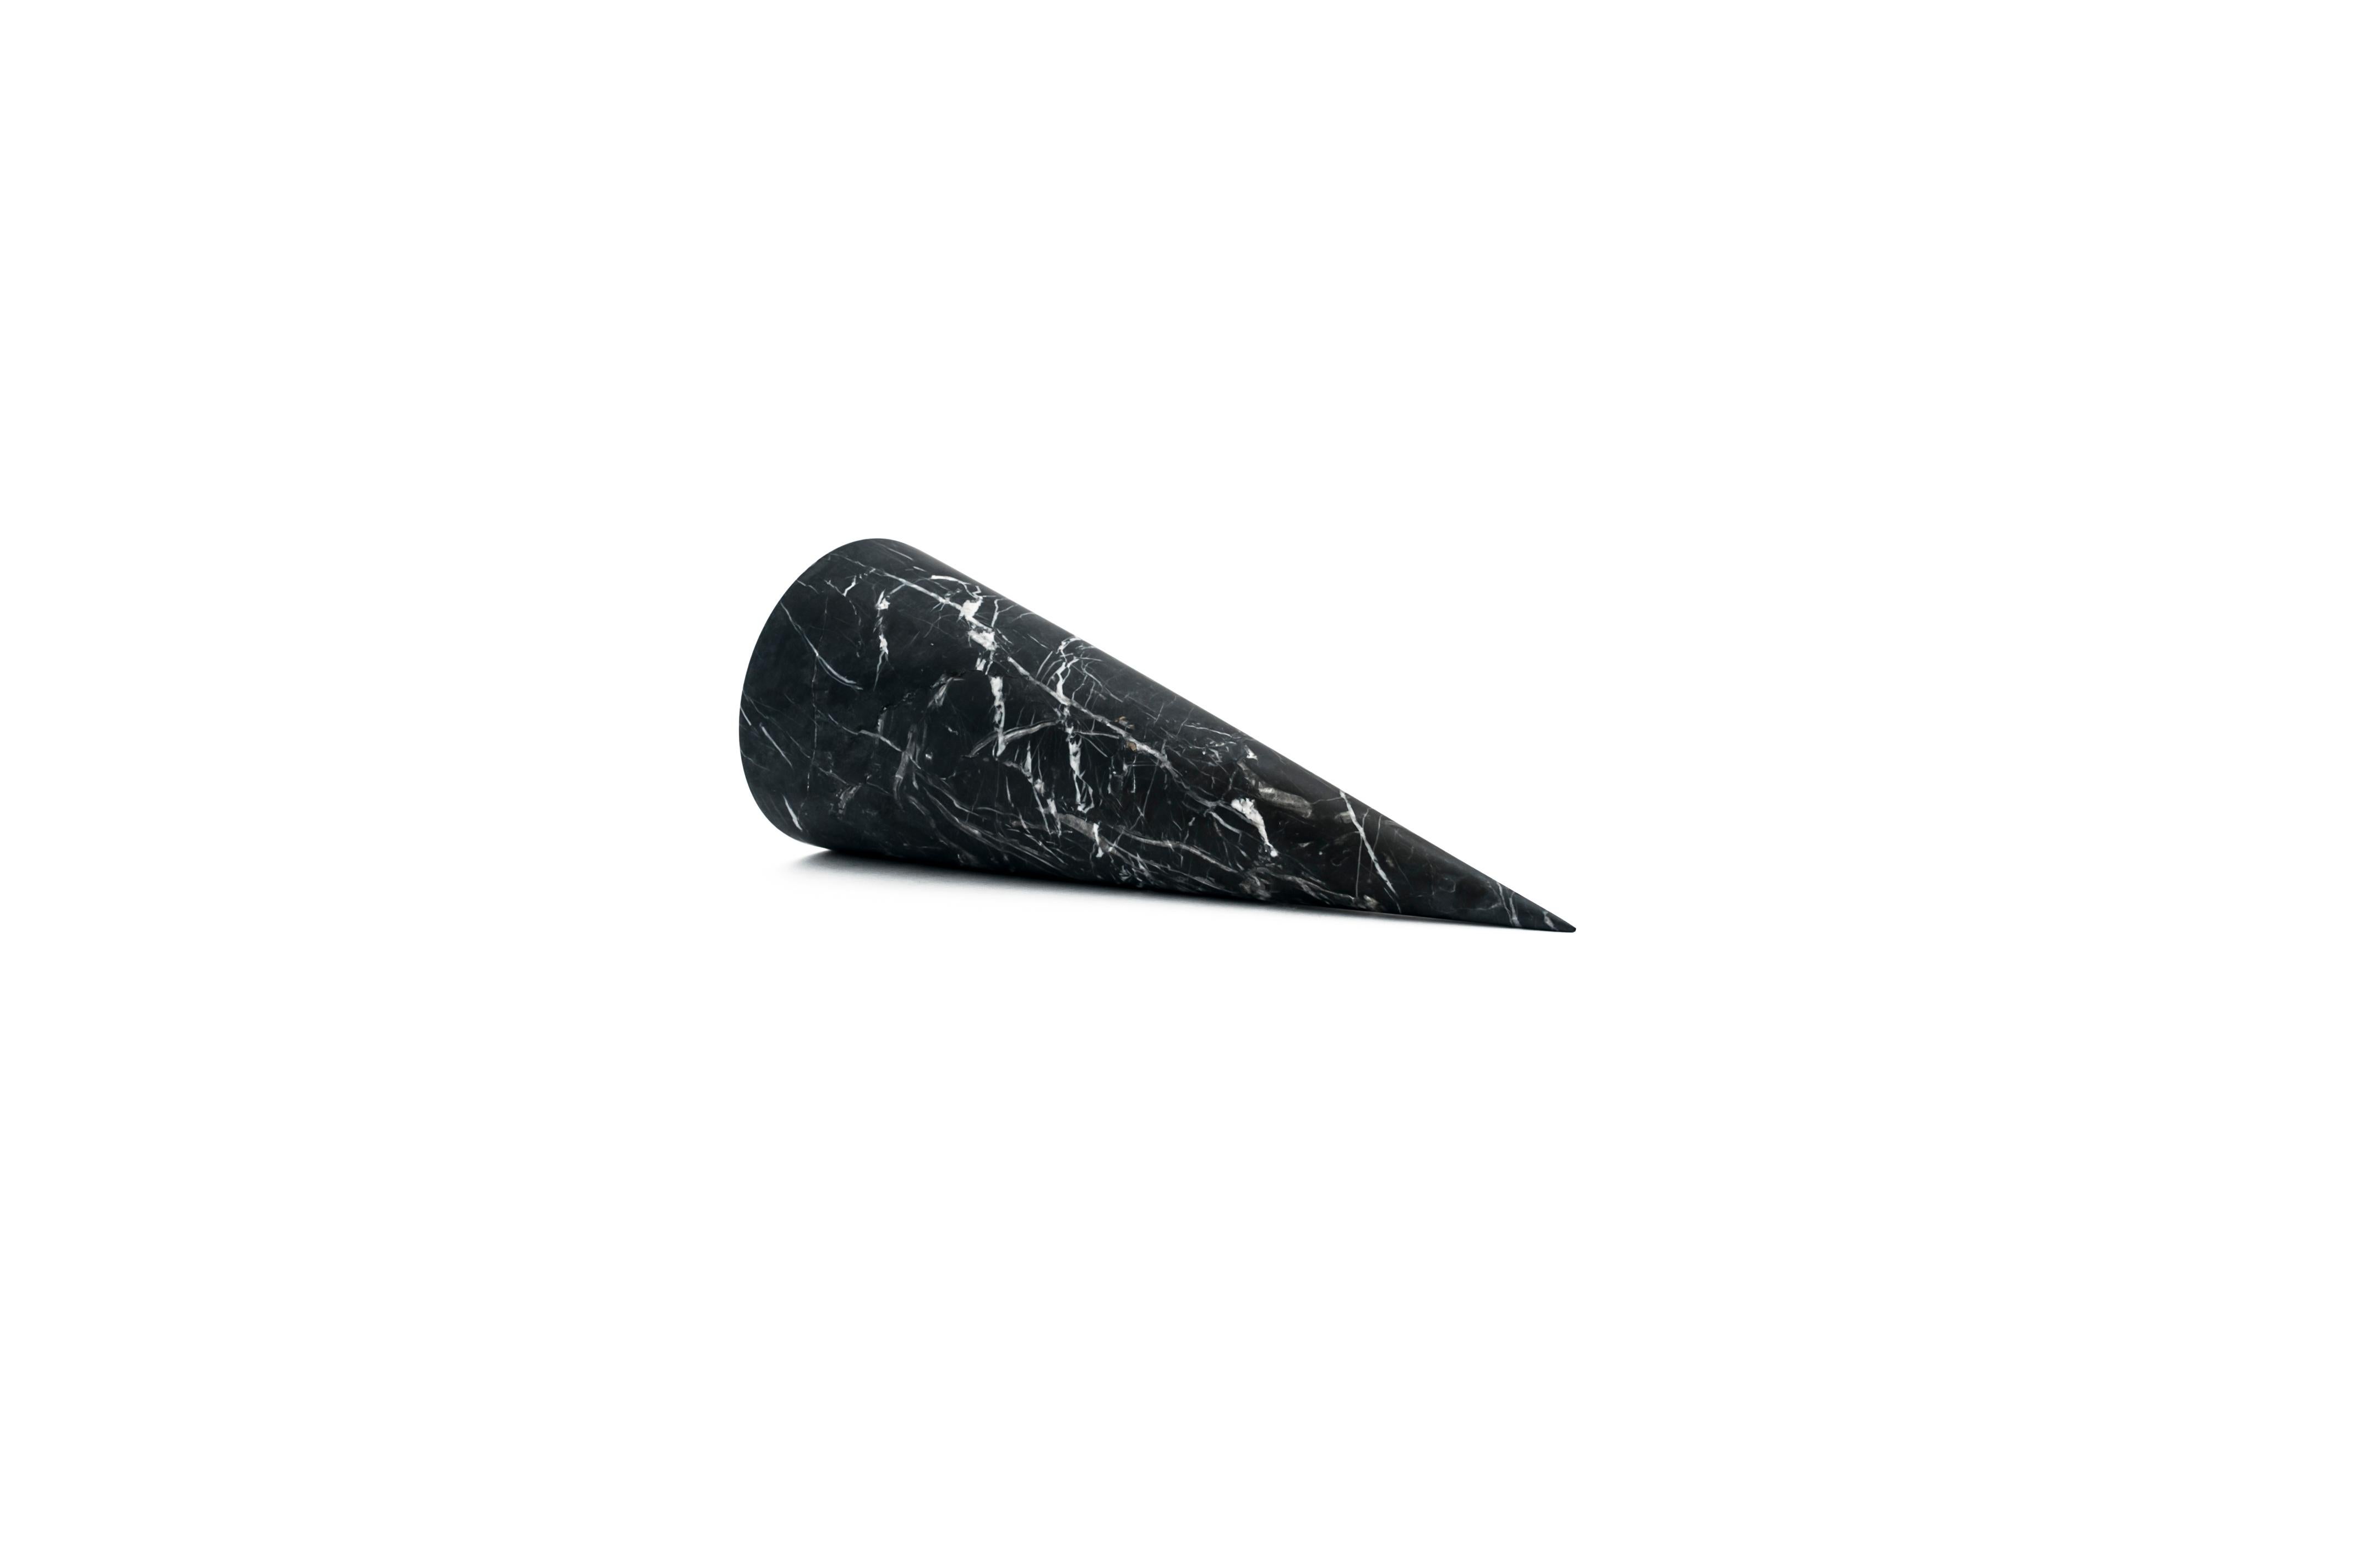 A decorative big cone full in black Marquina marble. Each piece is in a way unique (every marble block is different in veins and shades) and handmade by Italian artisans specialized over generations in processing marble. Slight variations in shape,